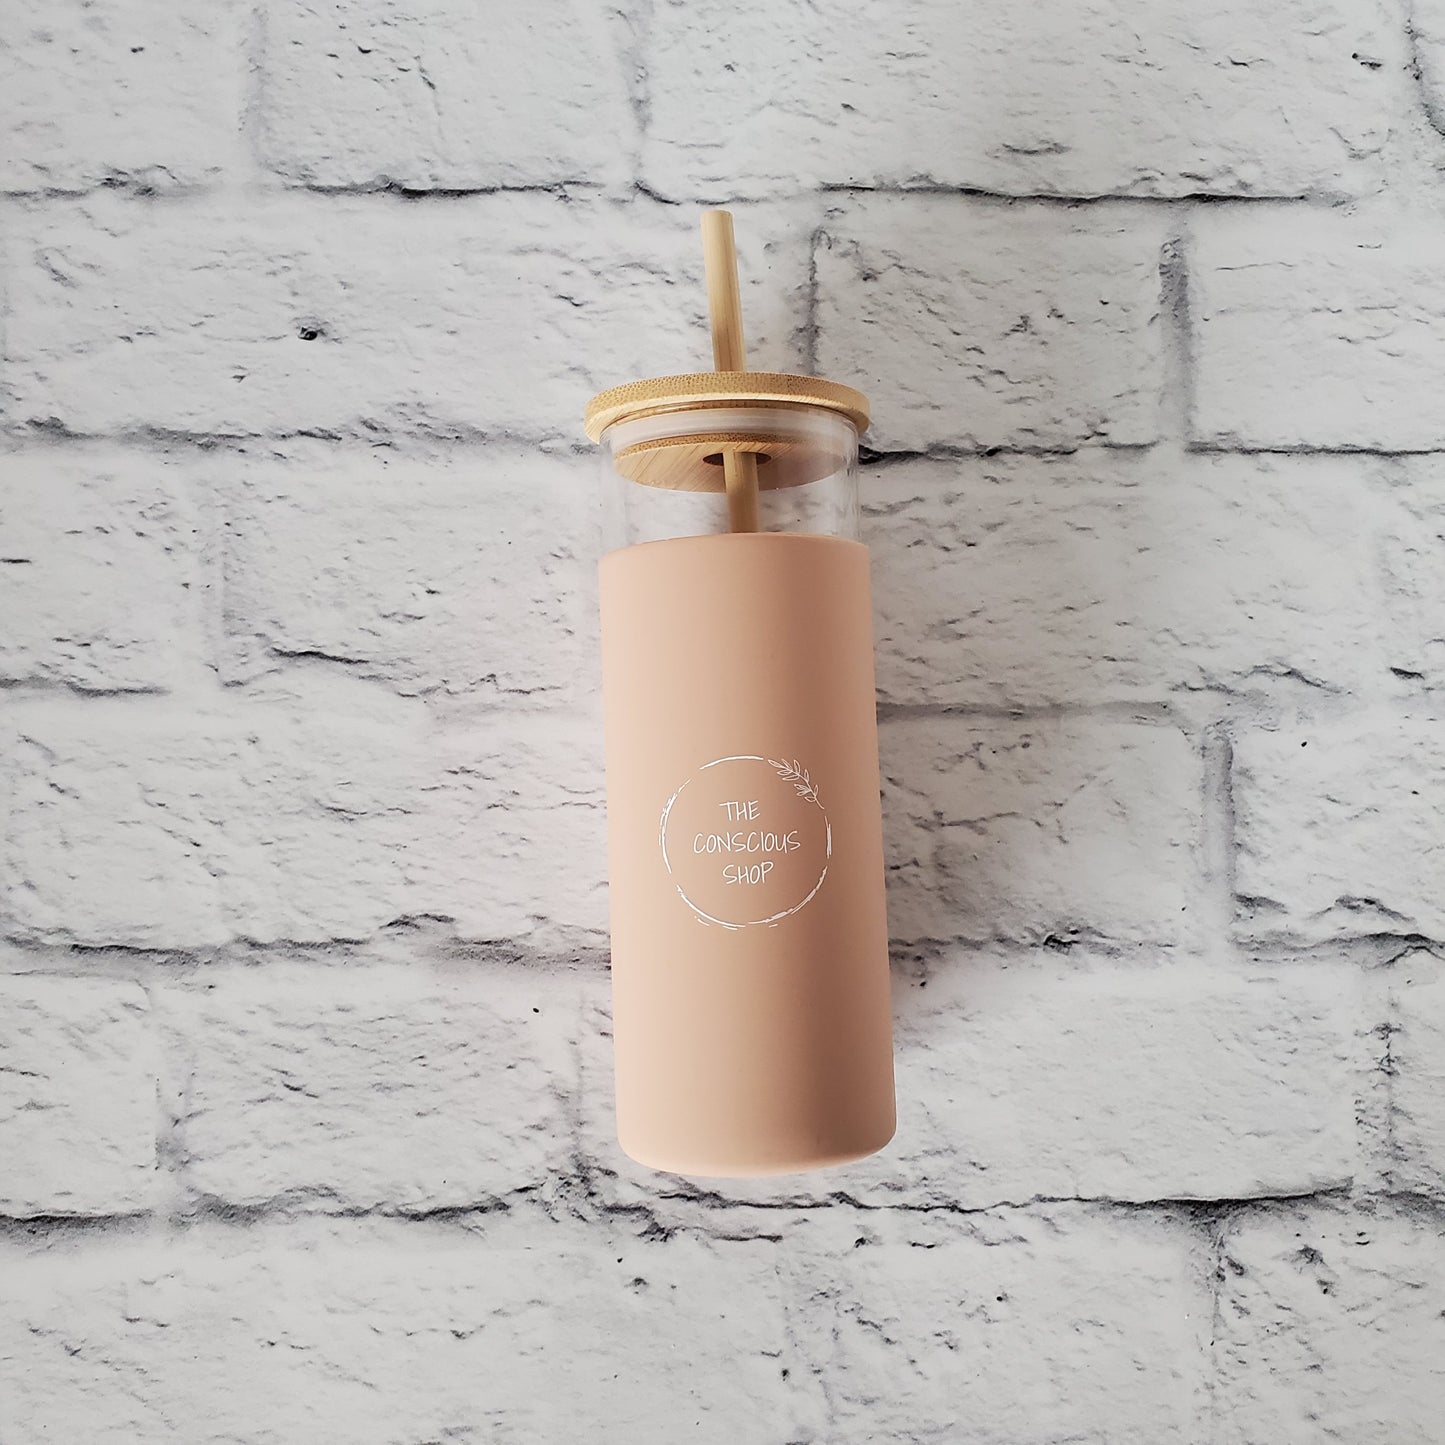 Glass and Bamboo Water Bottle with Straw – Chalkfulloflove